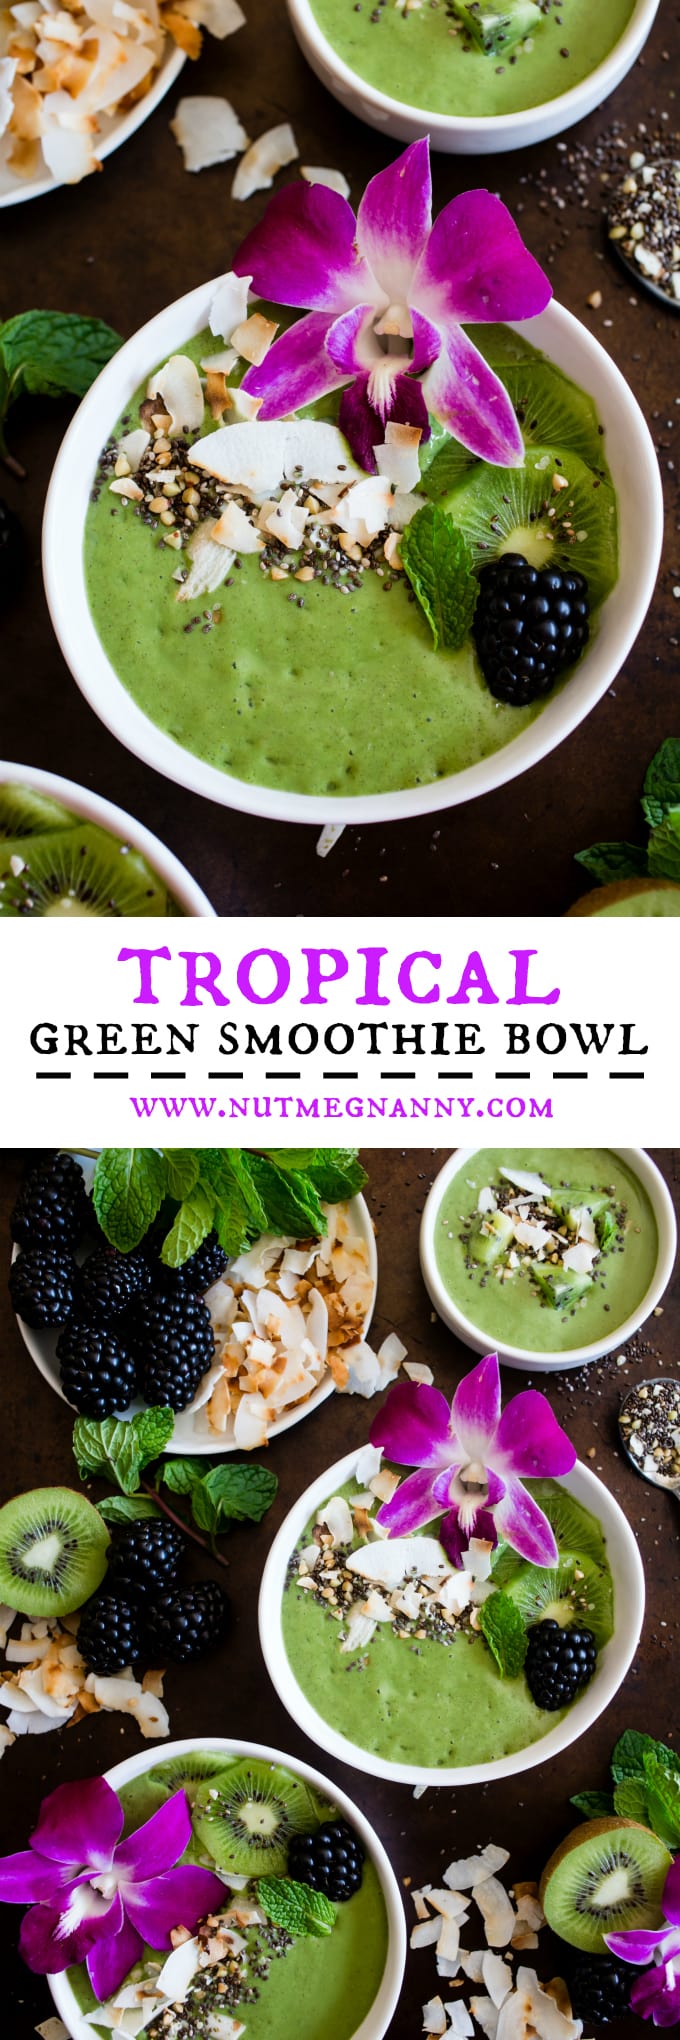 This tropical green smoothie bowl is made with frozen bananas, mango, kiwi, mint, spinach, chia seeds, vanilla soy yogurt and coconut milk. It's ready in just 5 minutes and tastes like a tropical paradise.